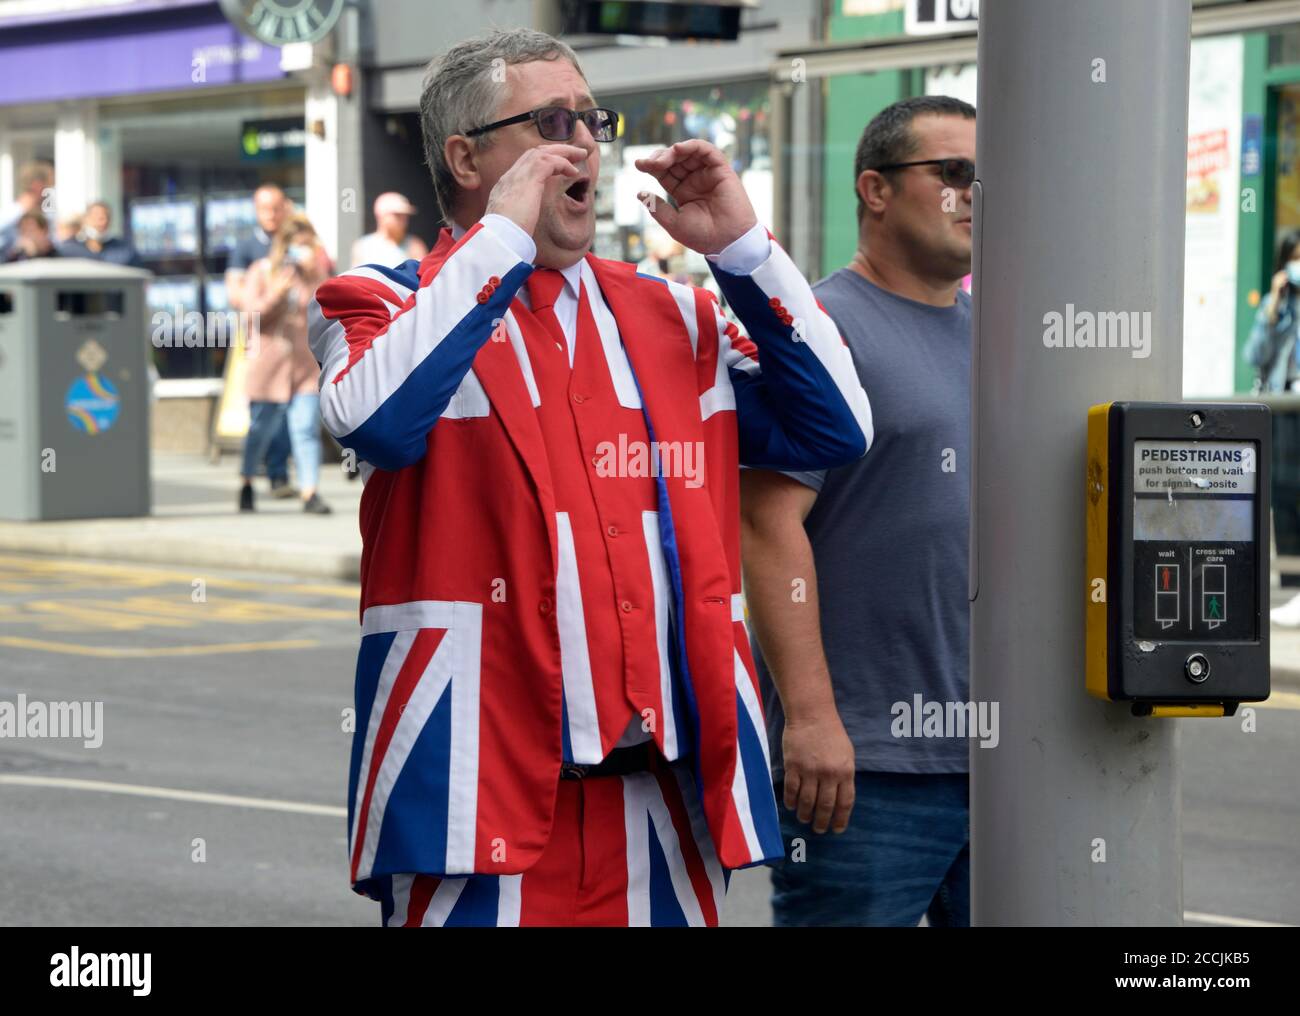 Right wing protester in Union Jack suit. Stock Photo